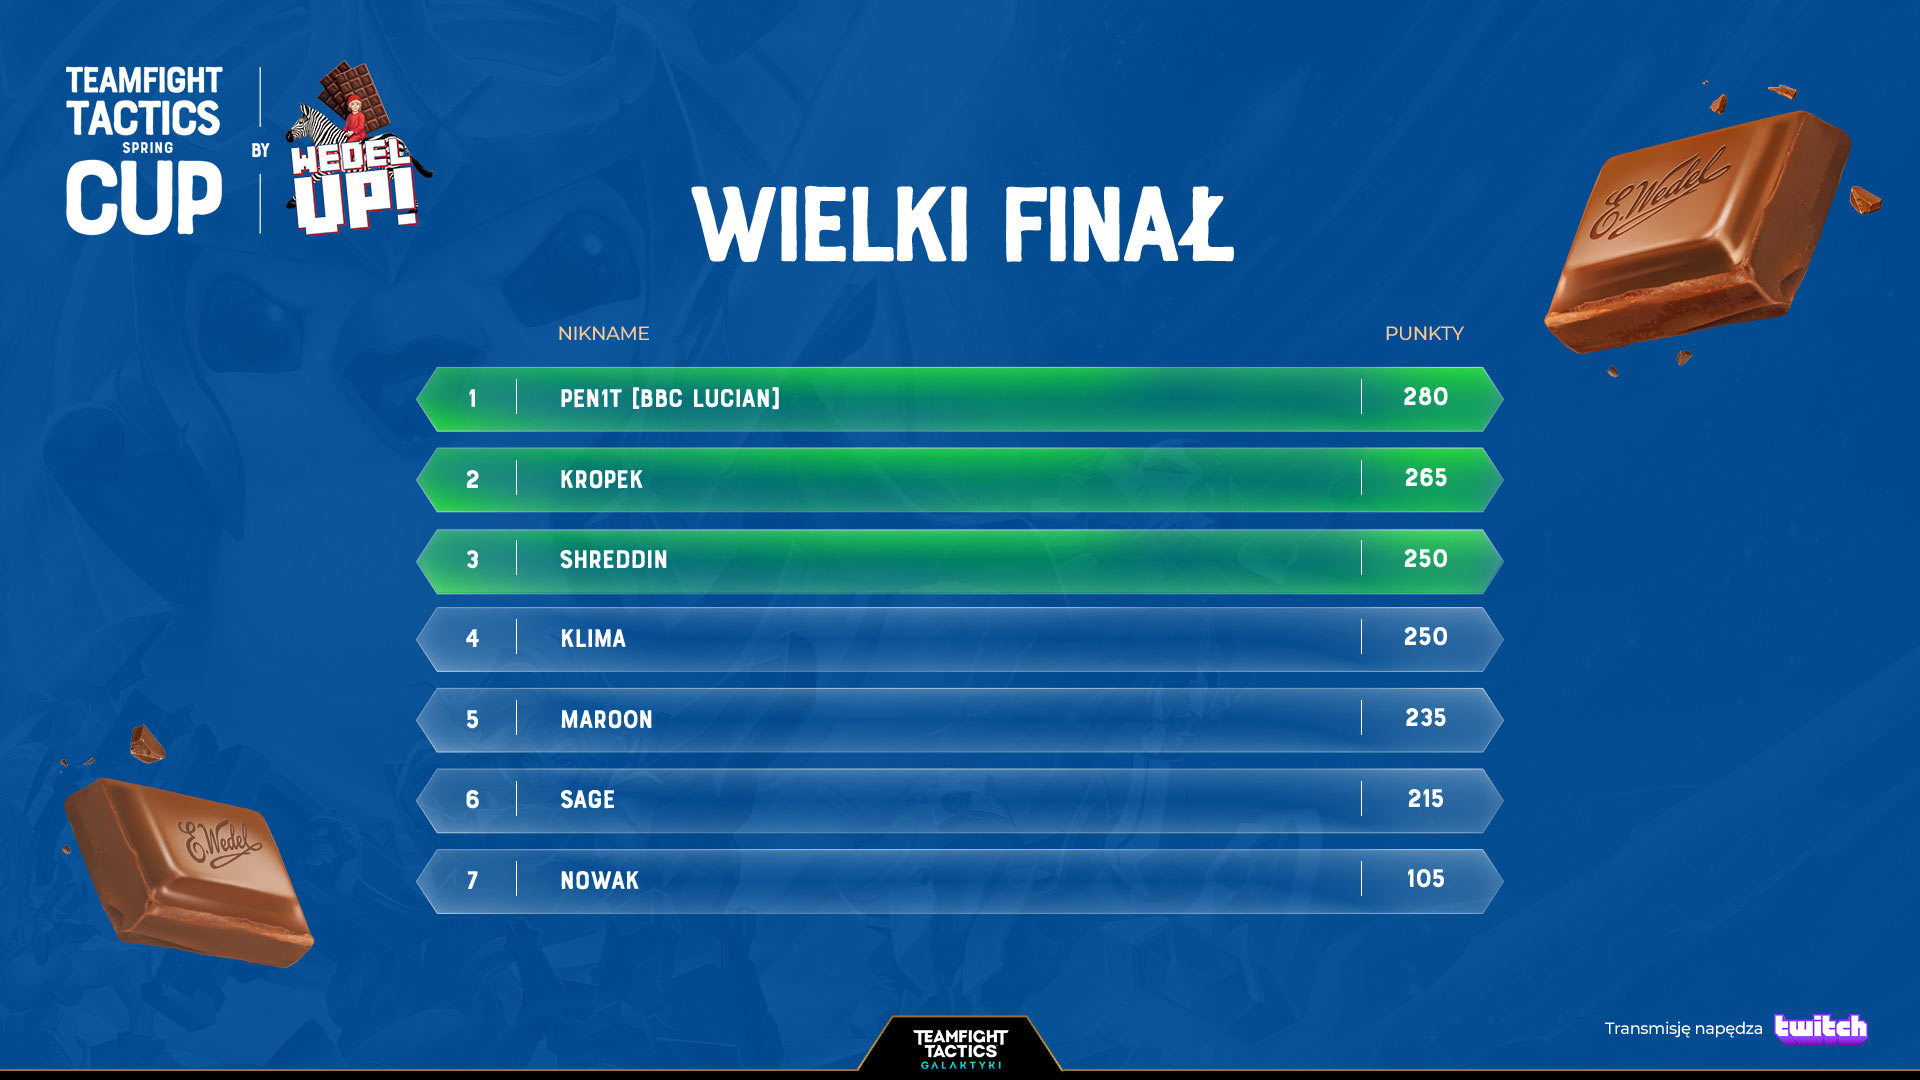 Wielki Fina Teamfight Tactics Spring CUP by Wedel Up!